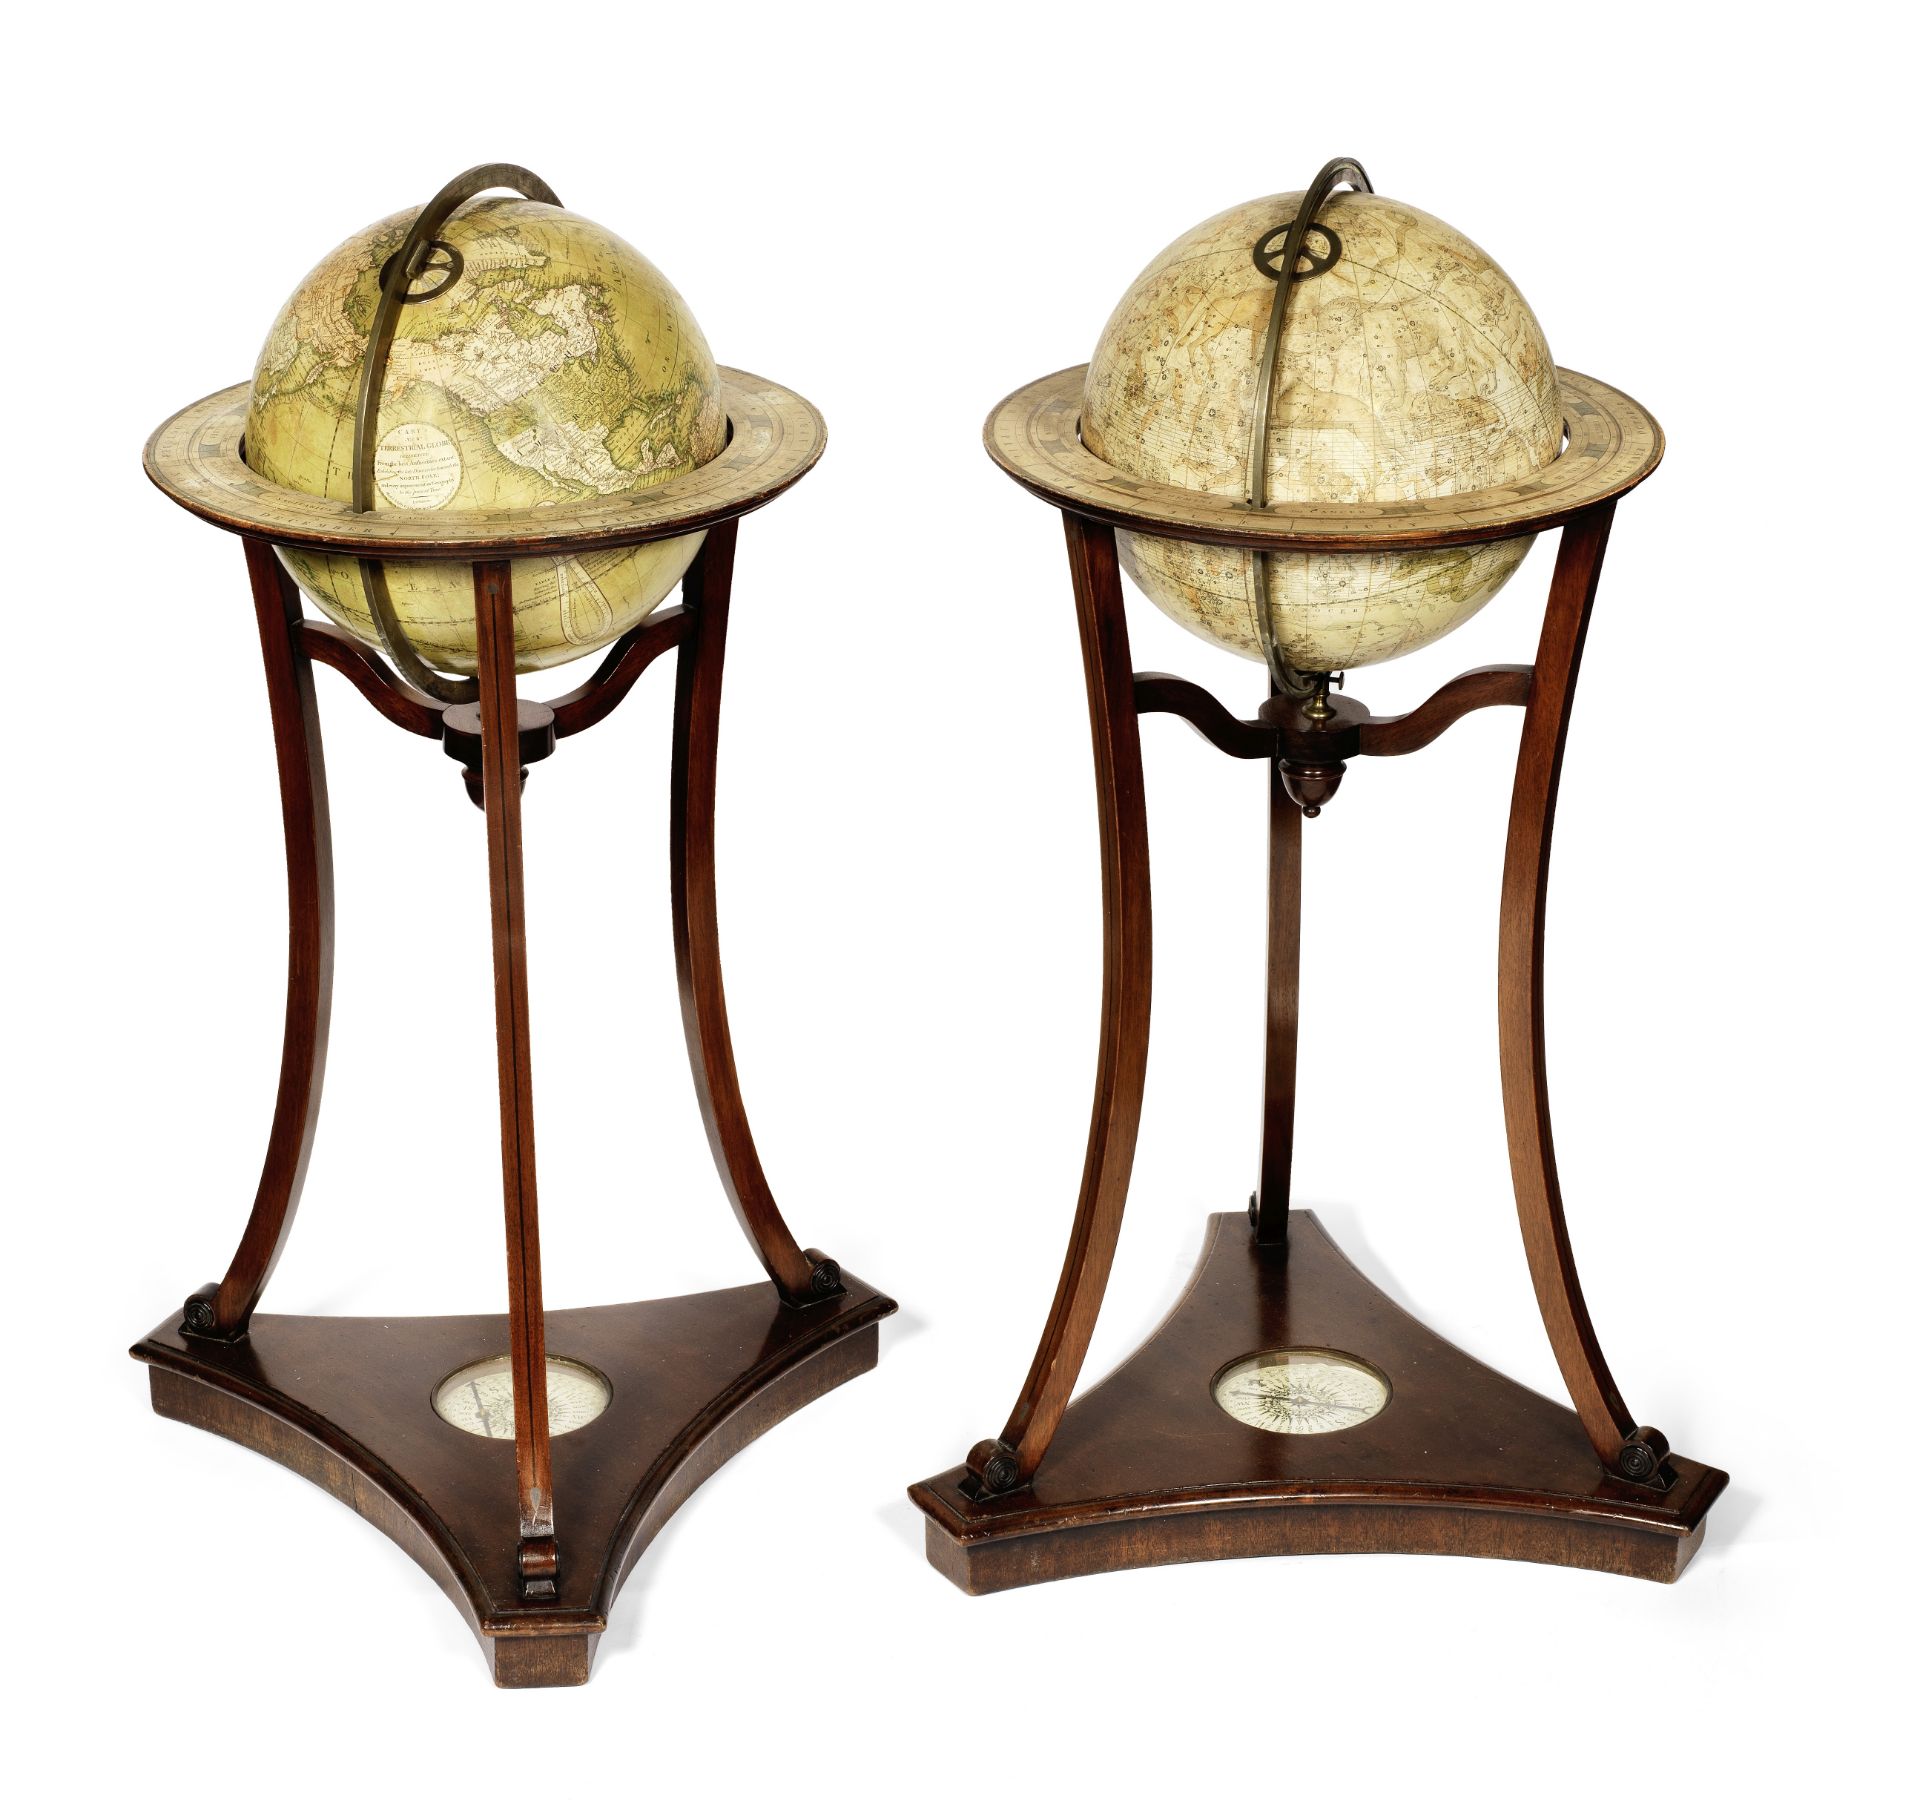 A Pair of Cary's 12-inch Terrestrial and Celestial Library Globes, English, early 19th century, 2